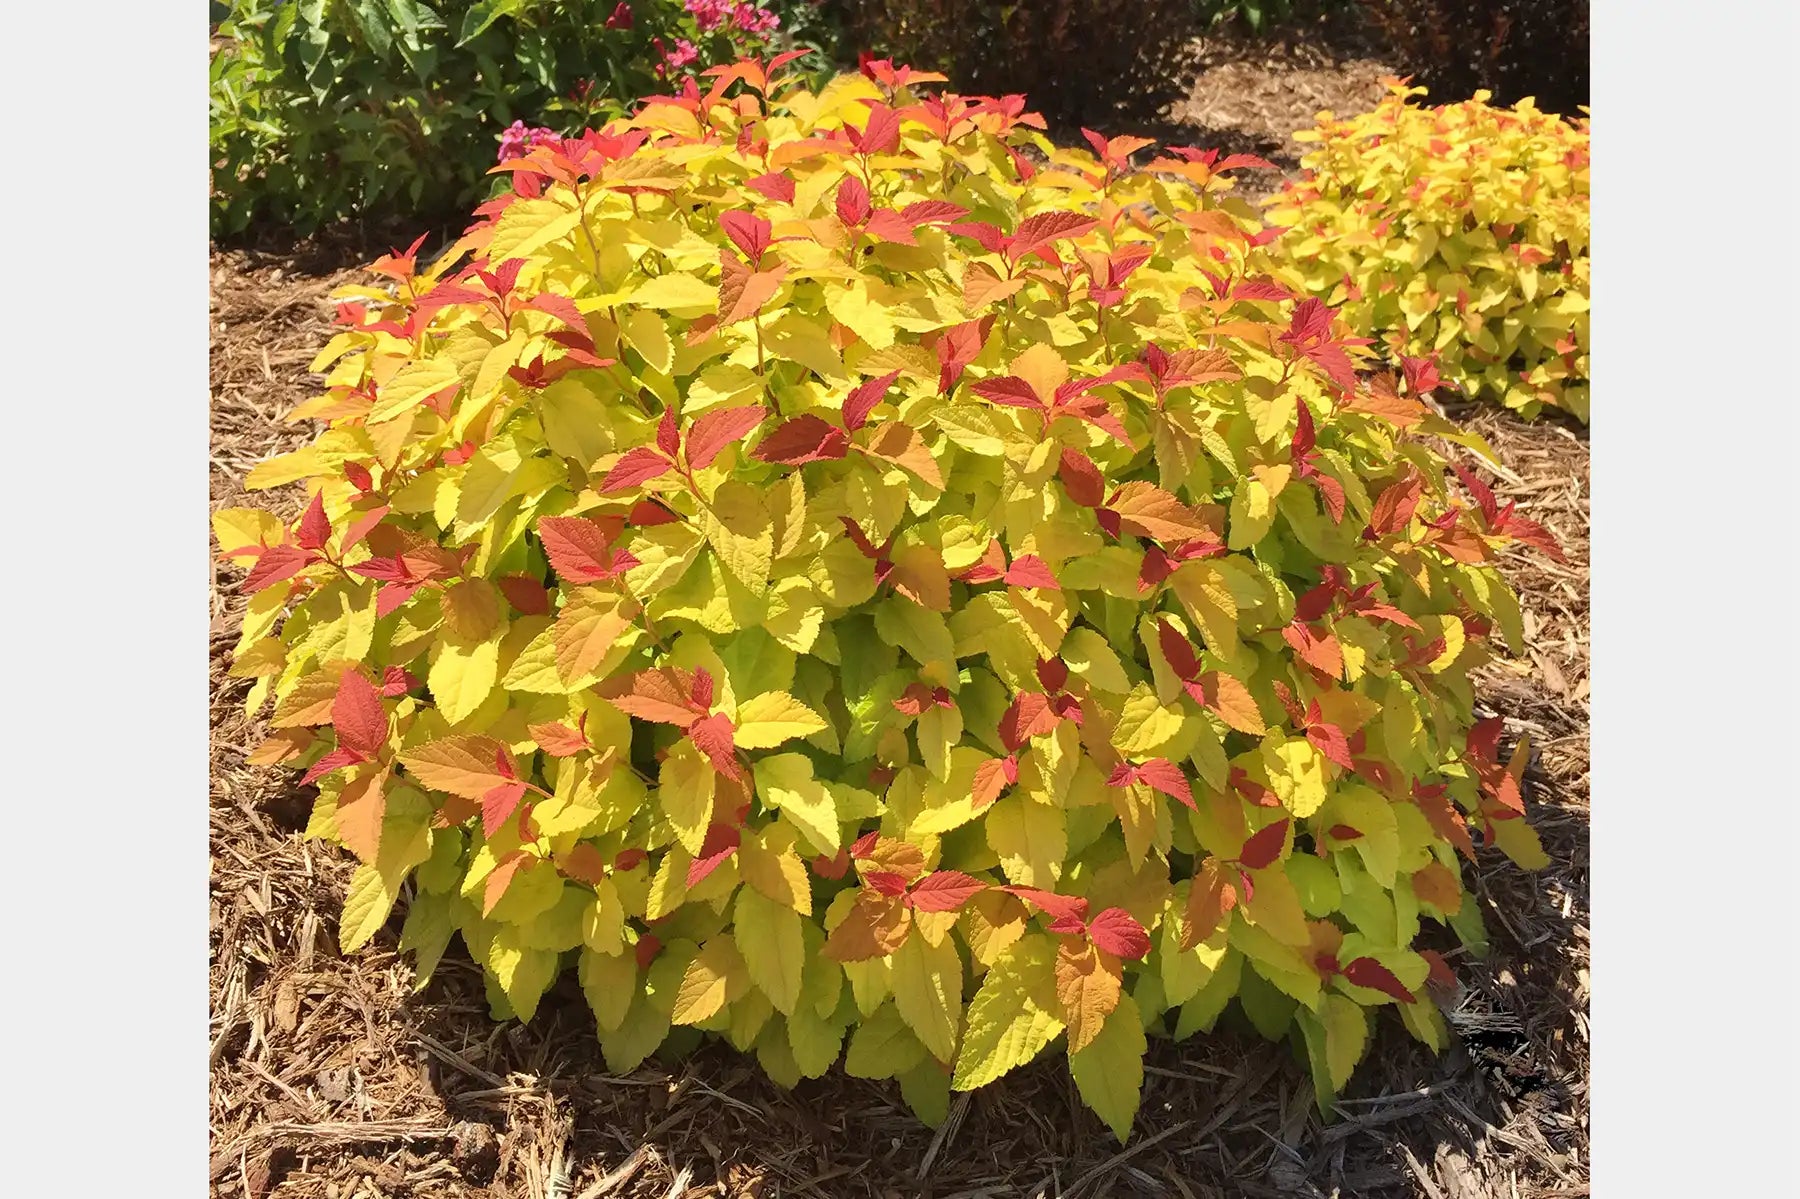 Lime, yellow, and brick colored foliage of Double Play Candy Corn® spirea on full display.